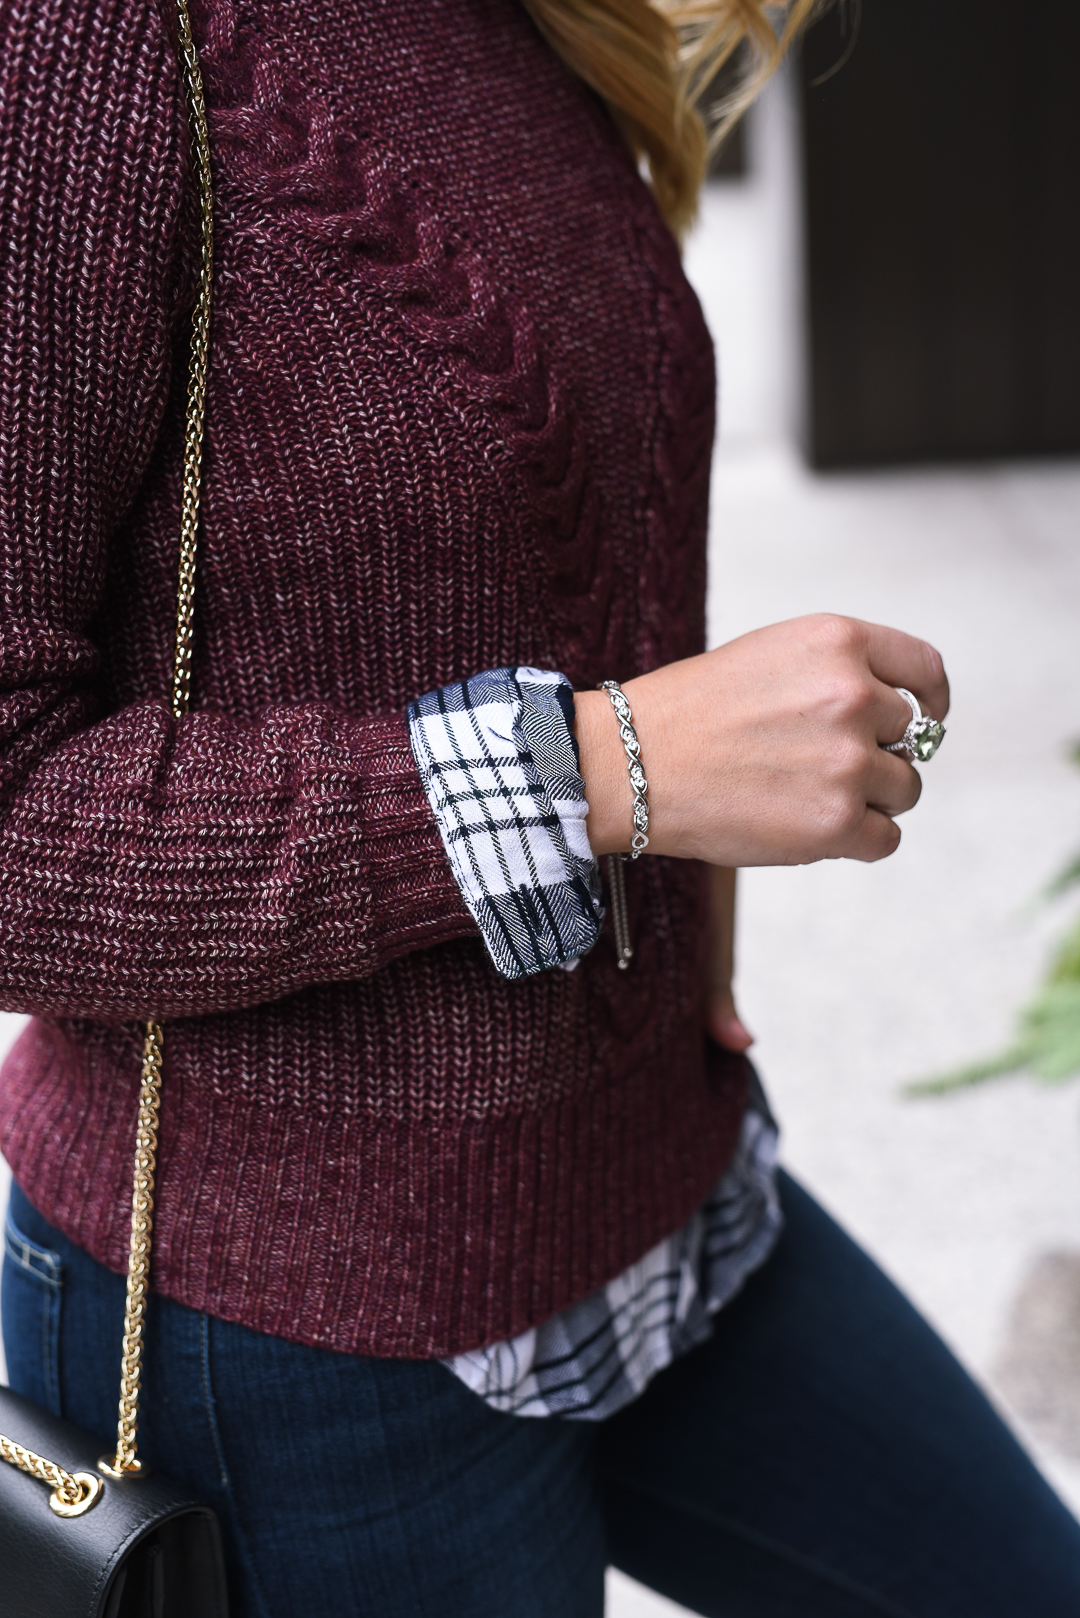 Best bracelet for the holidays - Best Cute Affordable Sweater for Layering by Chicago style blogger Visions of Vogue